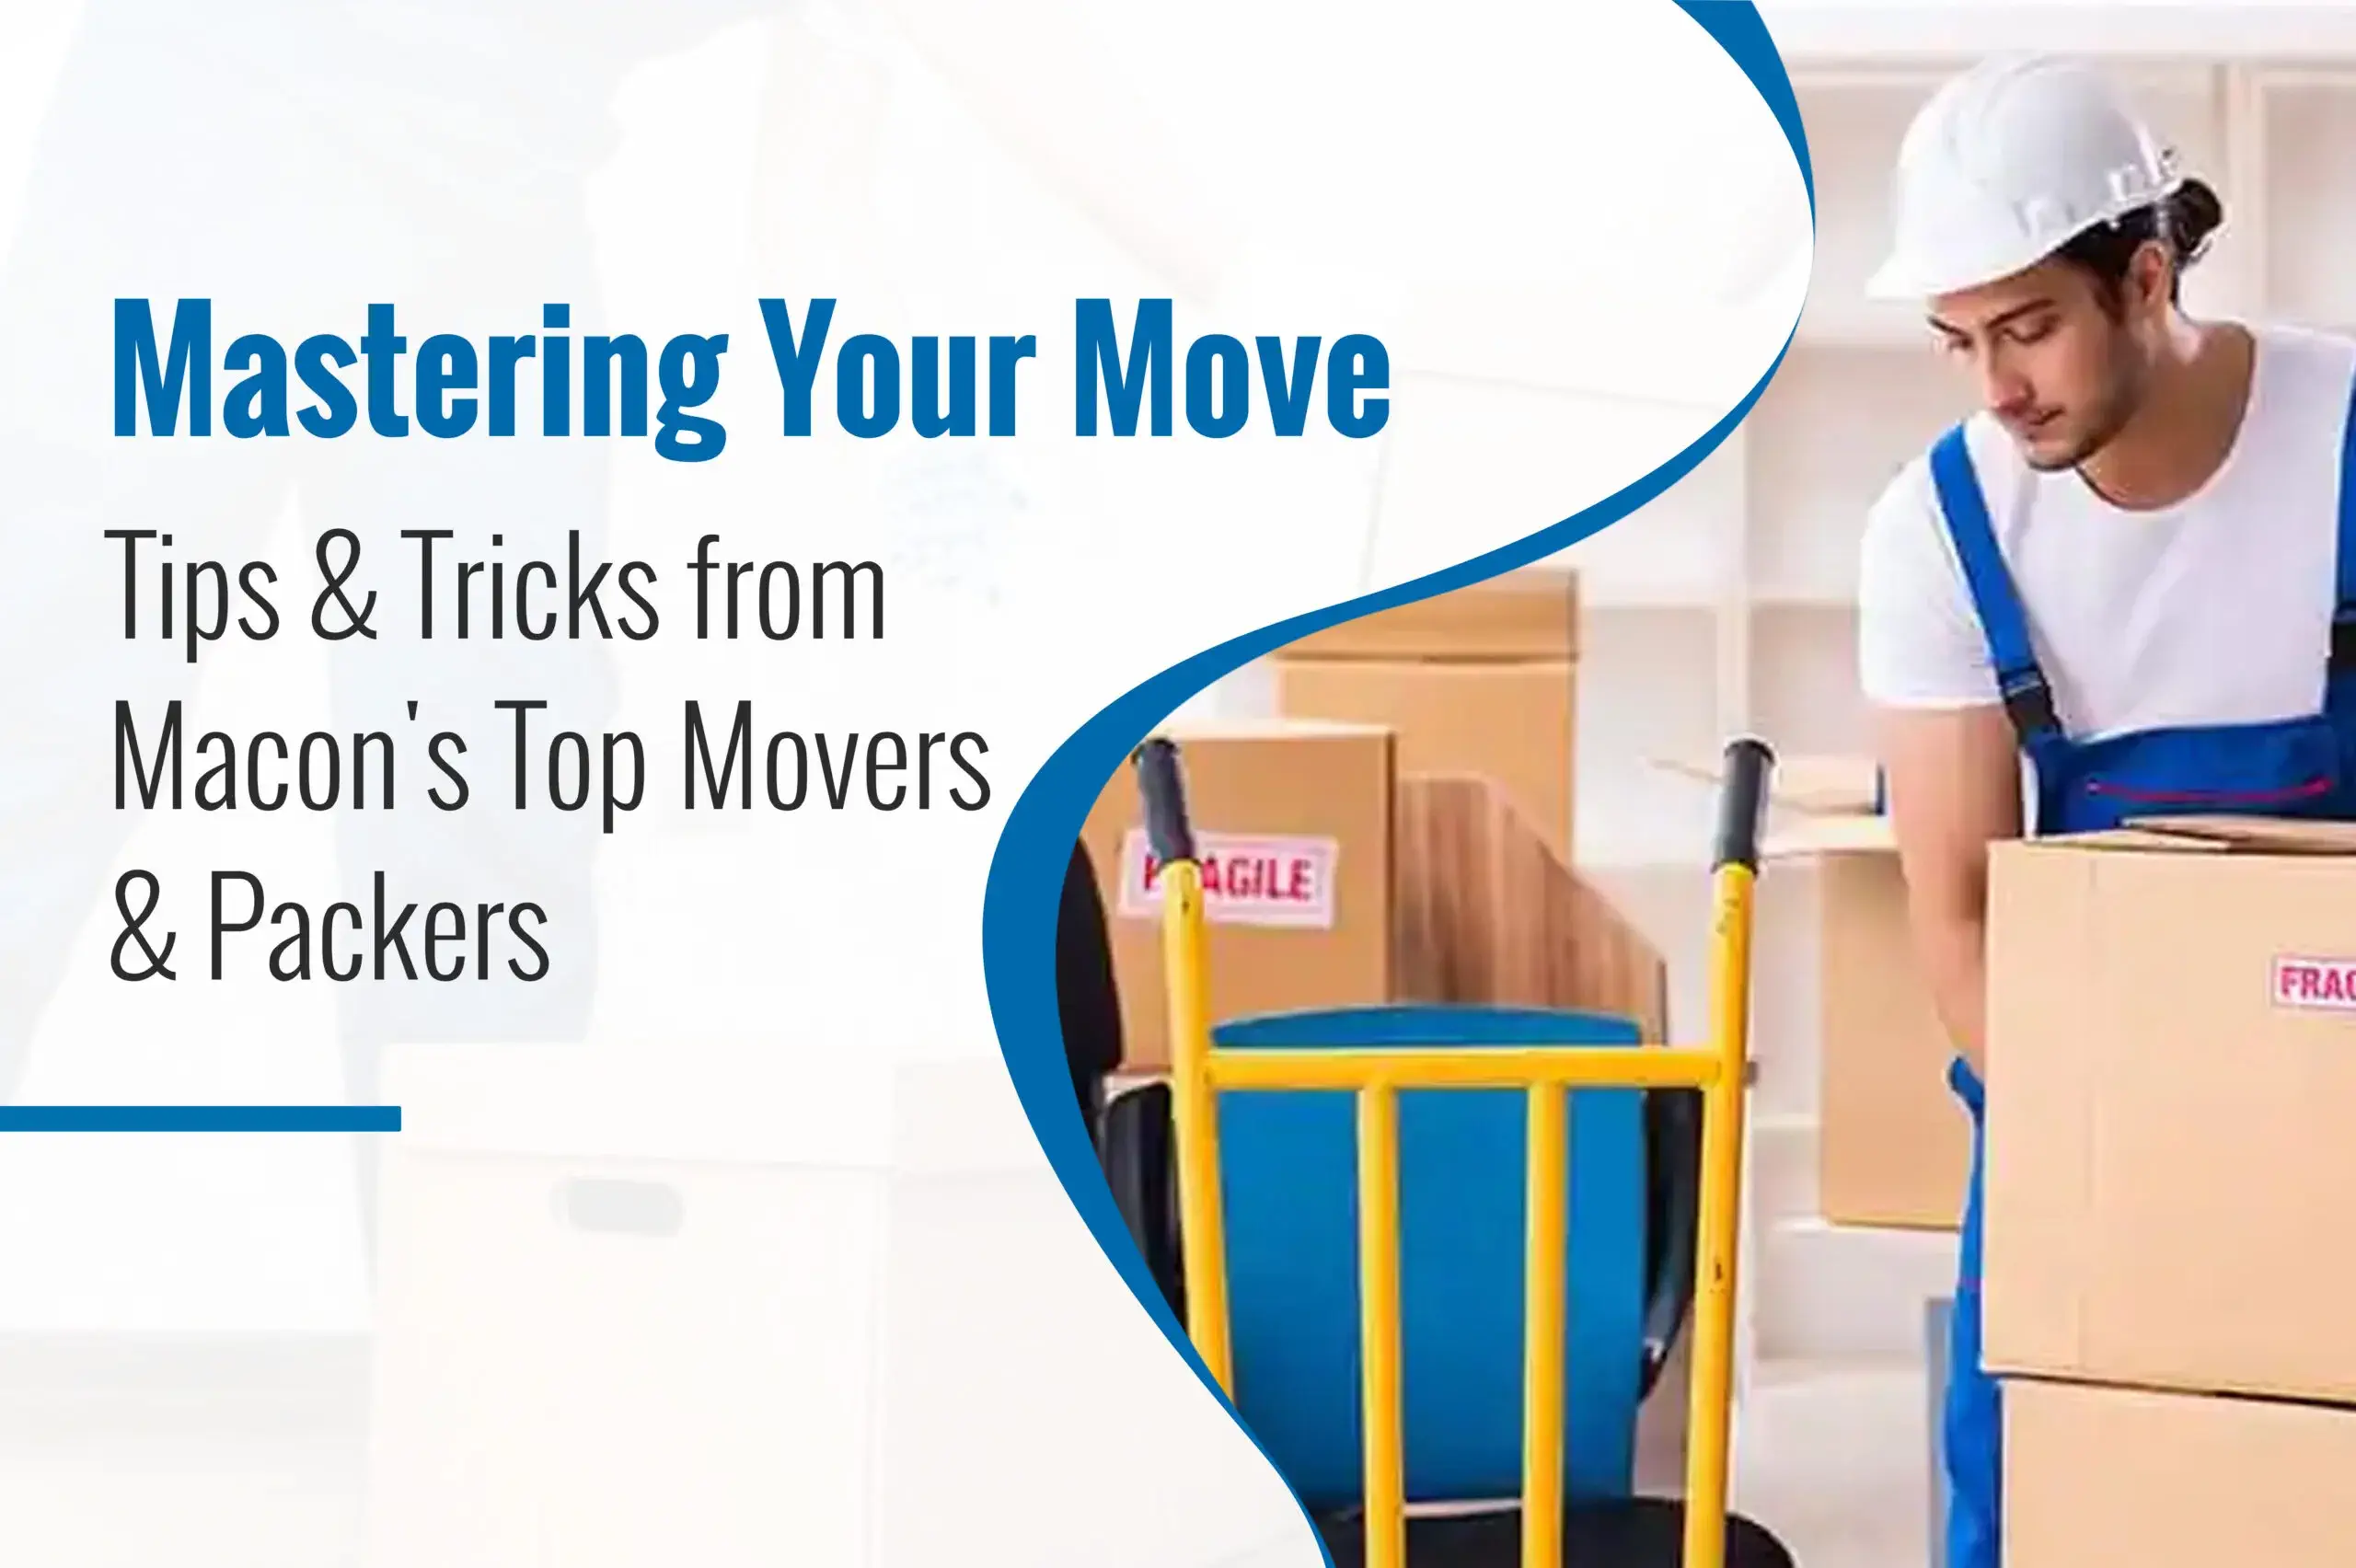 Mastering-Your-Move-Tips-and-Tricks-a-boy arranging boxes on trolley with amazing trick